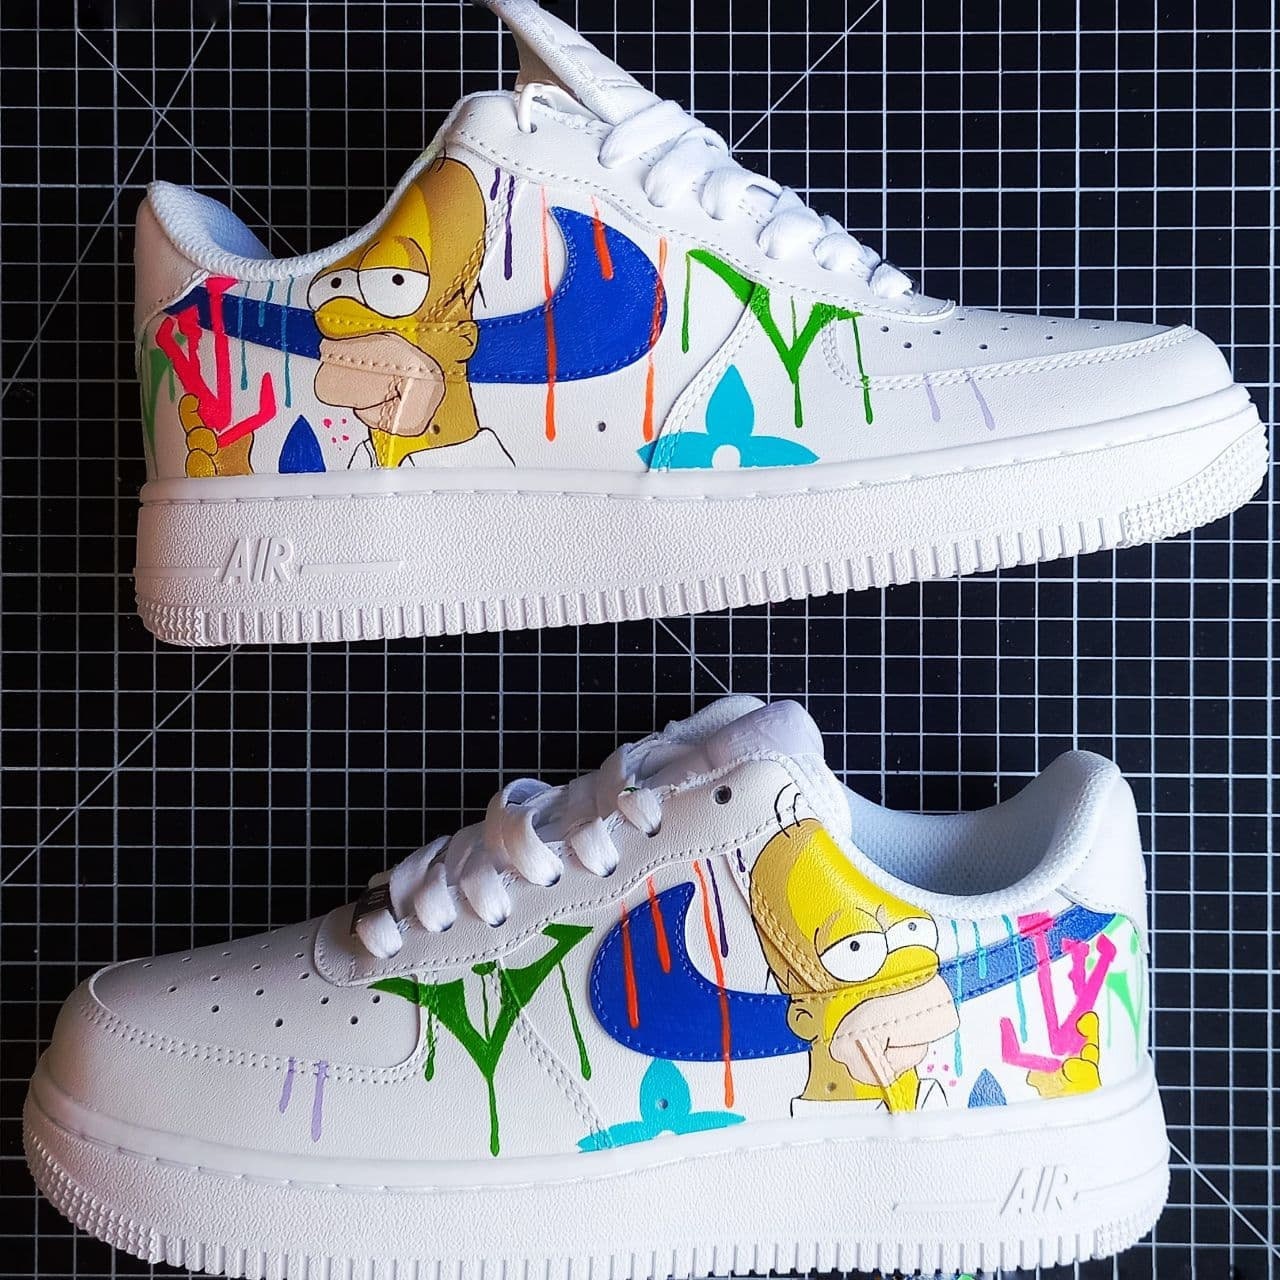 The Simpsons Sneakers Hand Painted Sneakers Cartoon Style | Etsy